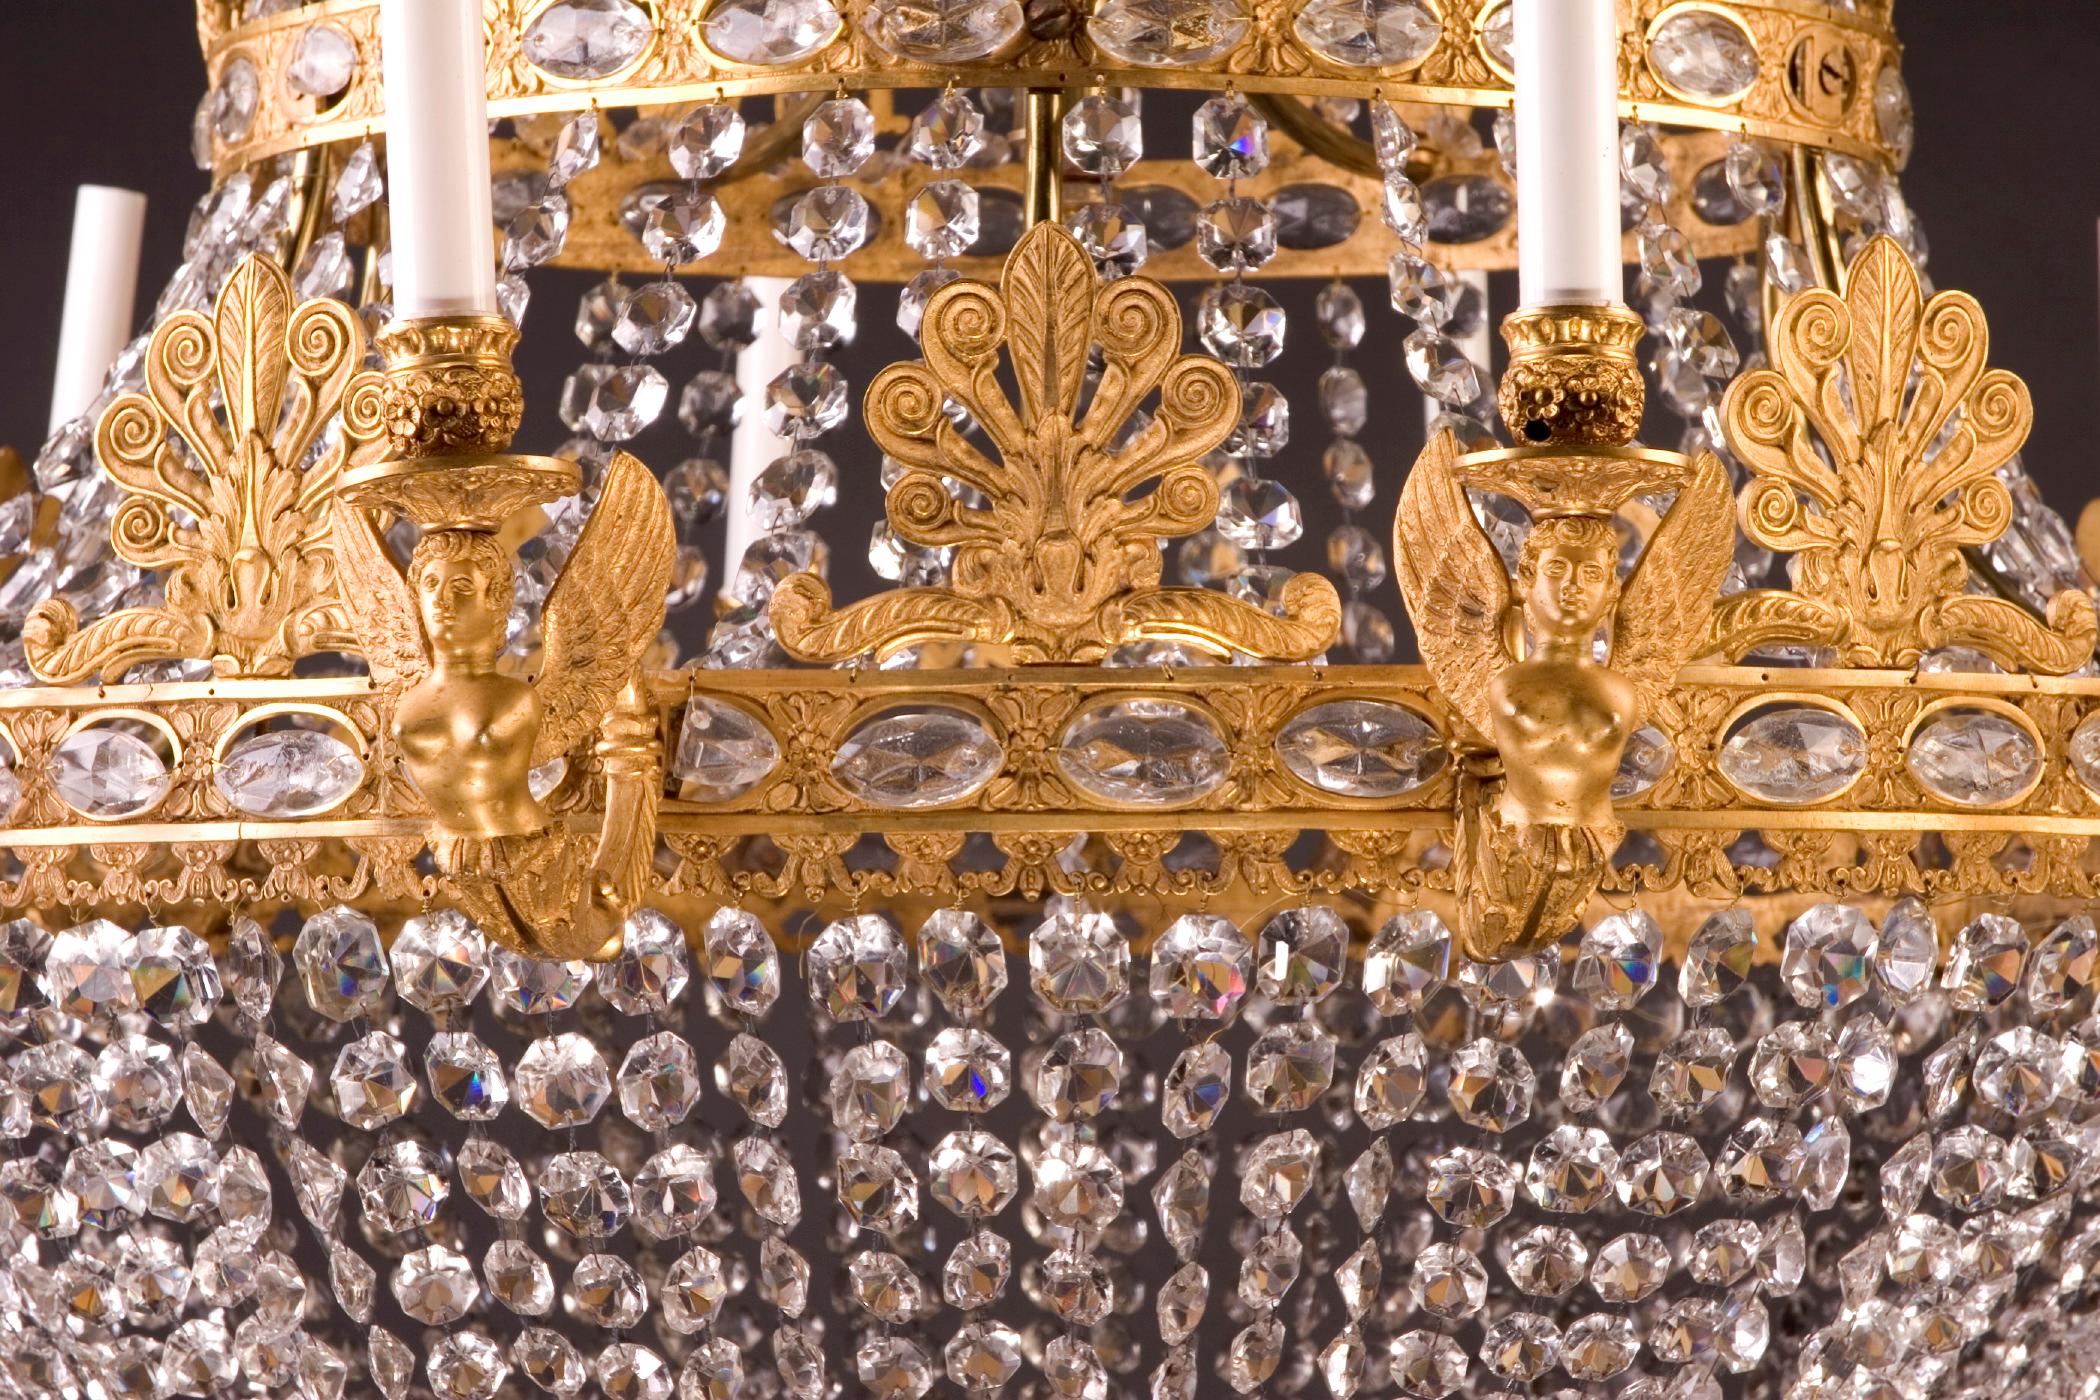 Grand French 19th Century Empire Bronze d’Ore and Crystal Chandelier For Sale 2